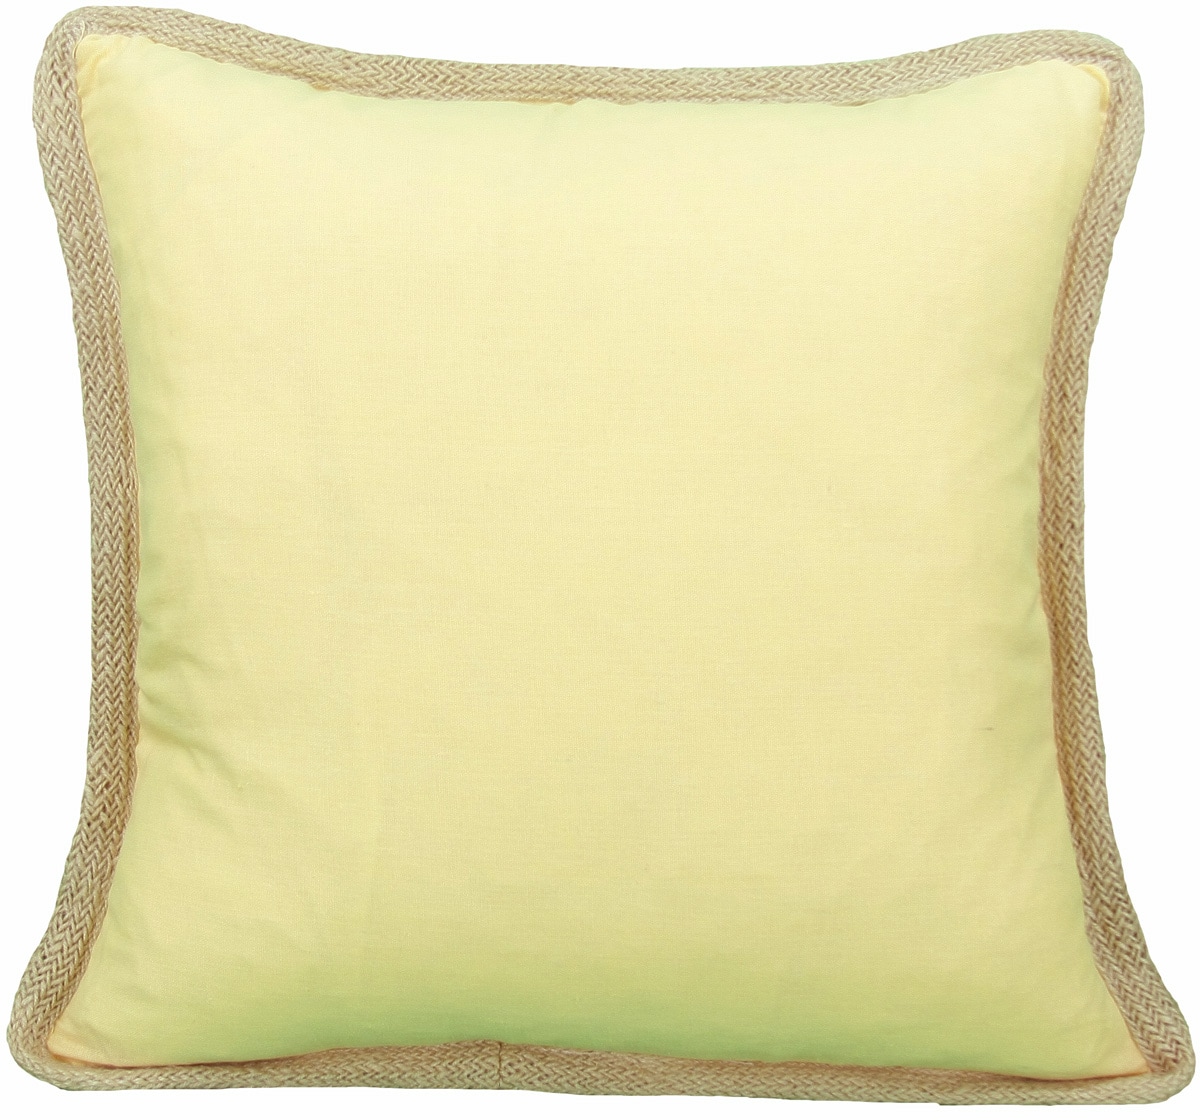 MANOR LUXE Classic Jute Trim20-in x 20-in Yellow Cotton Blend Indoor Decorative Pillow | ML1113082020YELLOWFE